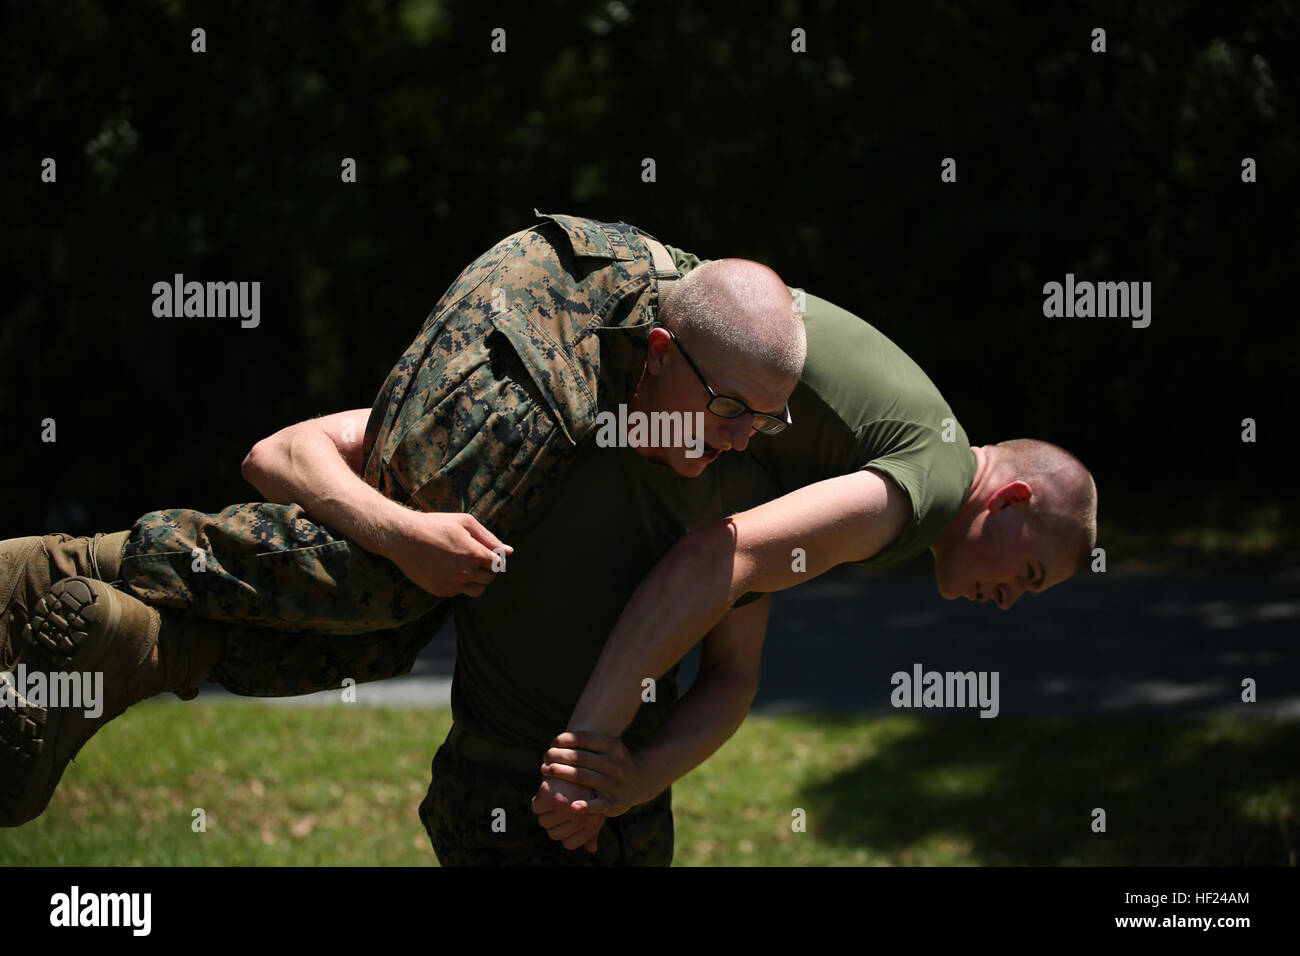 Rct. John McDonald carries Rct. Nicholas Shadlich, both with Platoon 1034, Alpha Company, 1st Recruit Training Battalion, during a developmental exercise session May 5, 2014, on Parris Island, S.C. The recruits completed a short circuit course that included pushups and buddy drags and carries. The session is part of the Developmental Exercise Program, which aims to supplement recruits’ physical training and further their fitness. McDonald, a 19-year-old from Falmouth, Ky., and Shadlich a 19-year-old from Ocala, Fla., are scheduled to graduate May 30, 2014. Parris Island has been the site of Ma Stock Photo